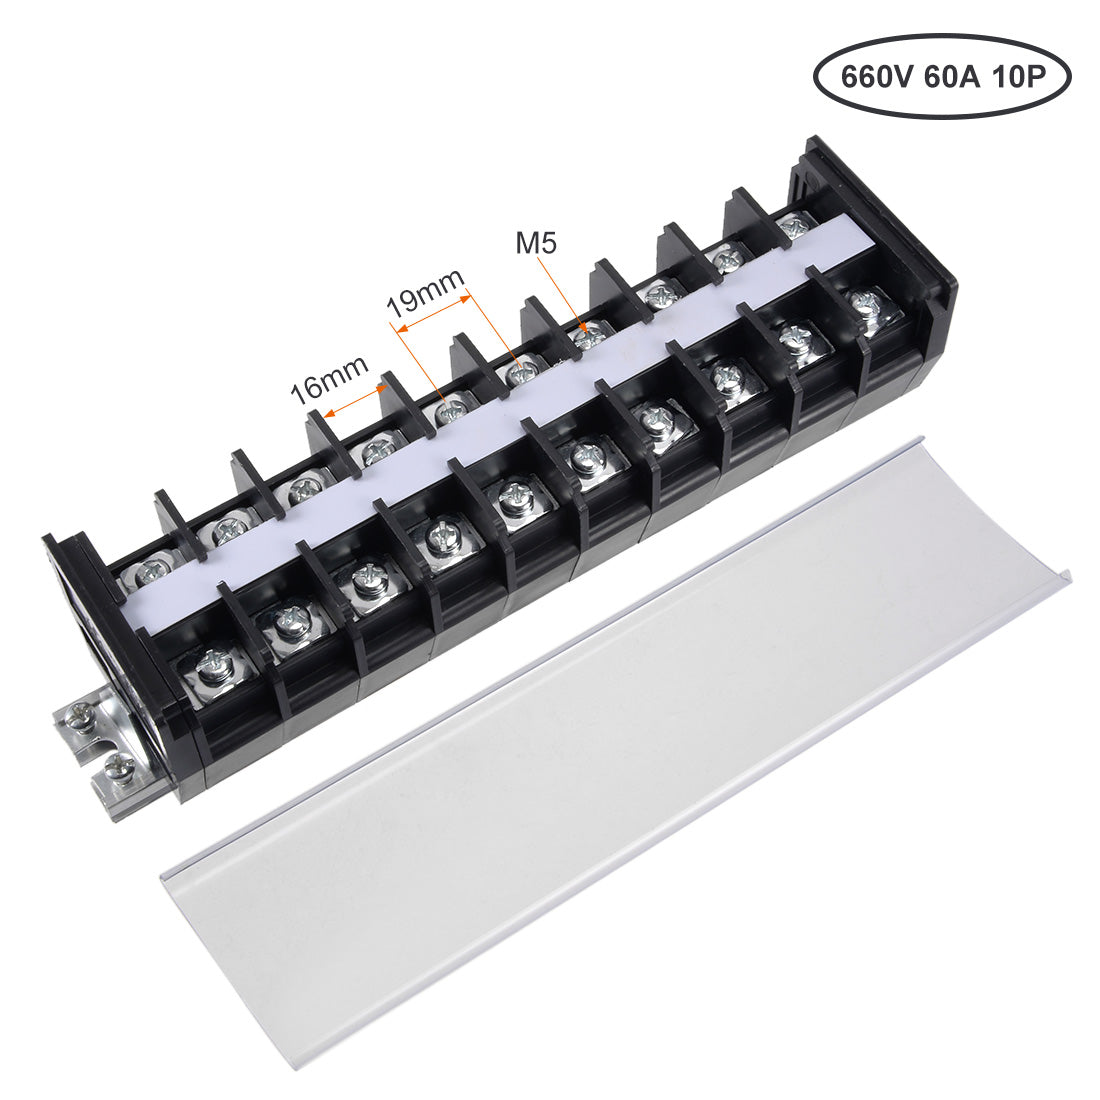 uxcell Uxcell Barrier Terminal Strip Block 660V 60A Dual Rows 10 Position DIN Rail Base Covered Screw